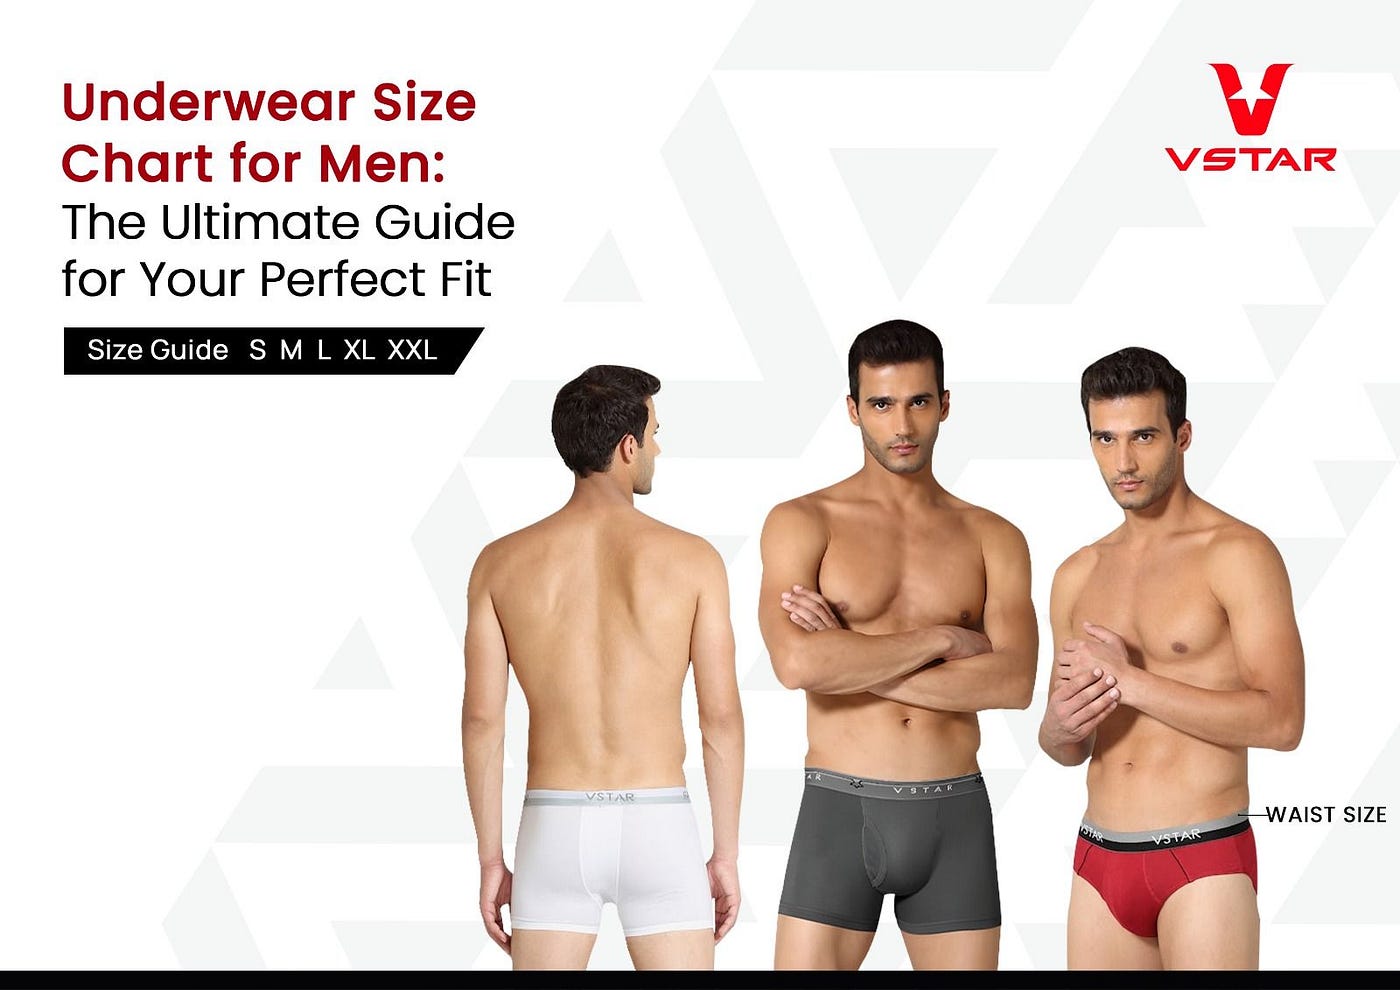 Underwear Size Chart for Men: The Ultimate Guide for Your Perfect